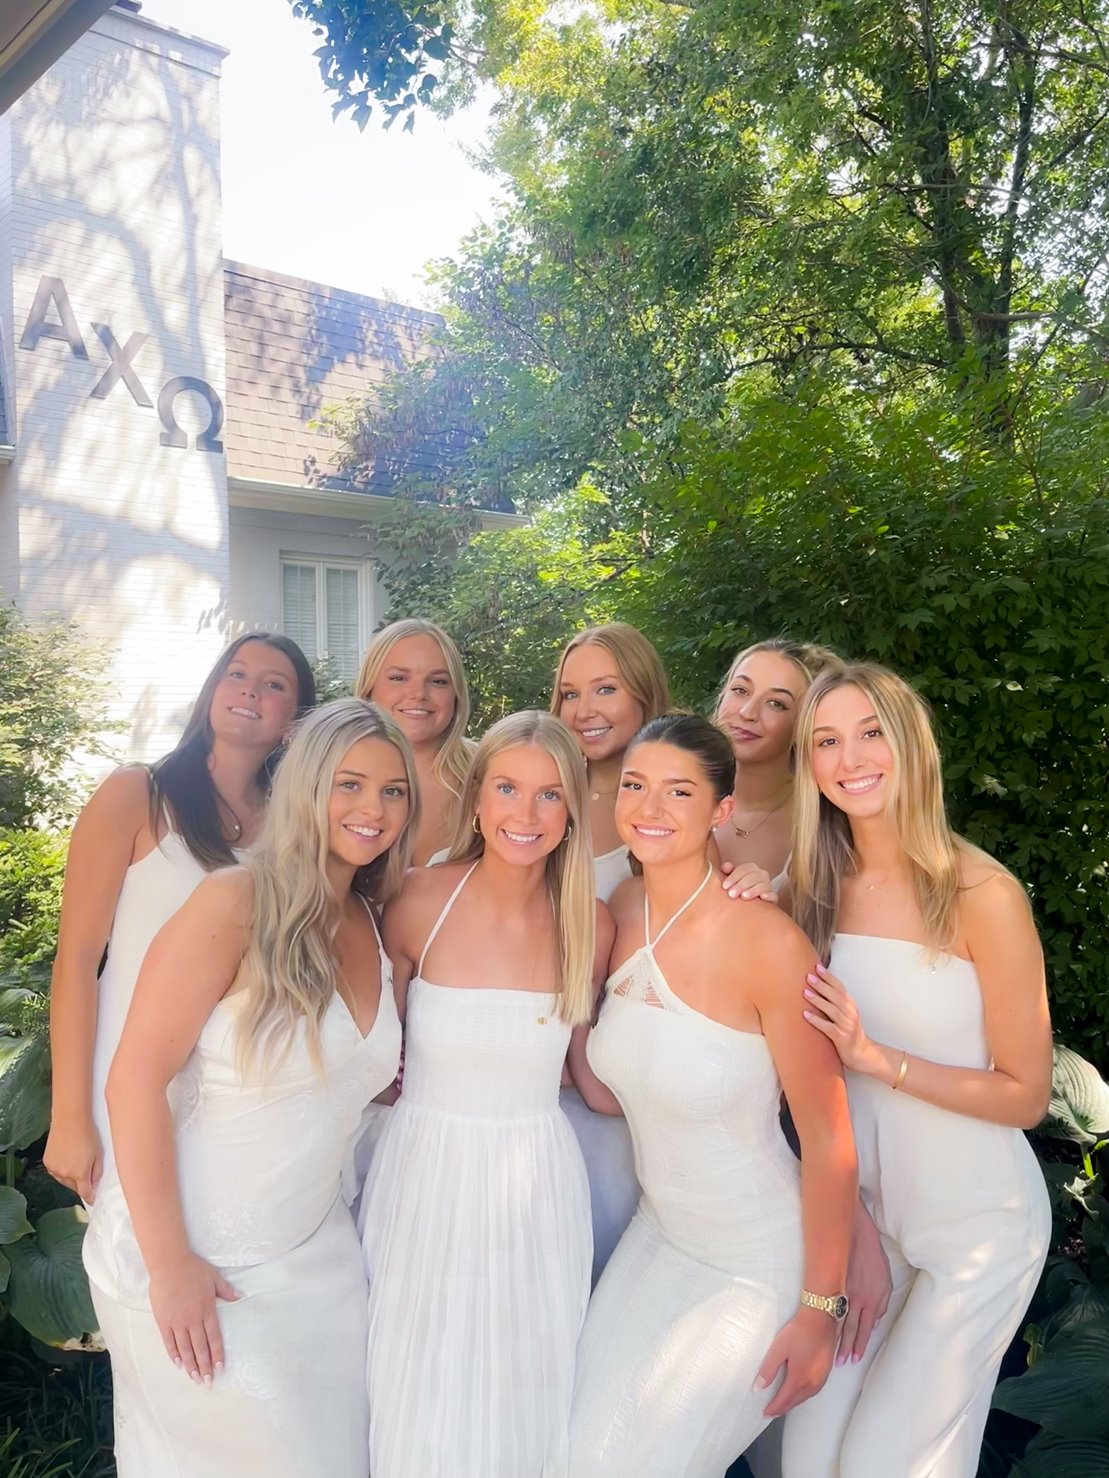 Emma with sisters